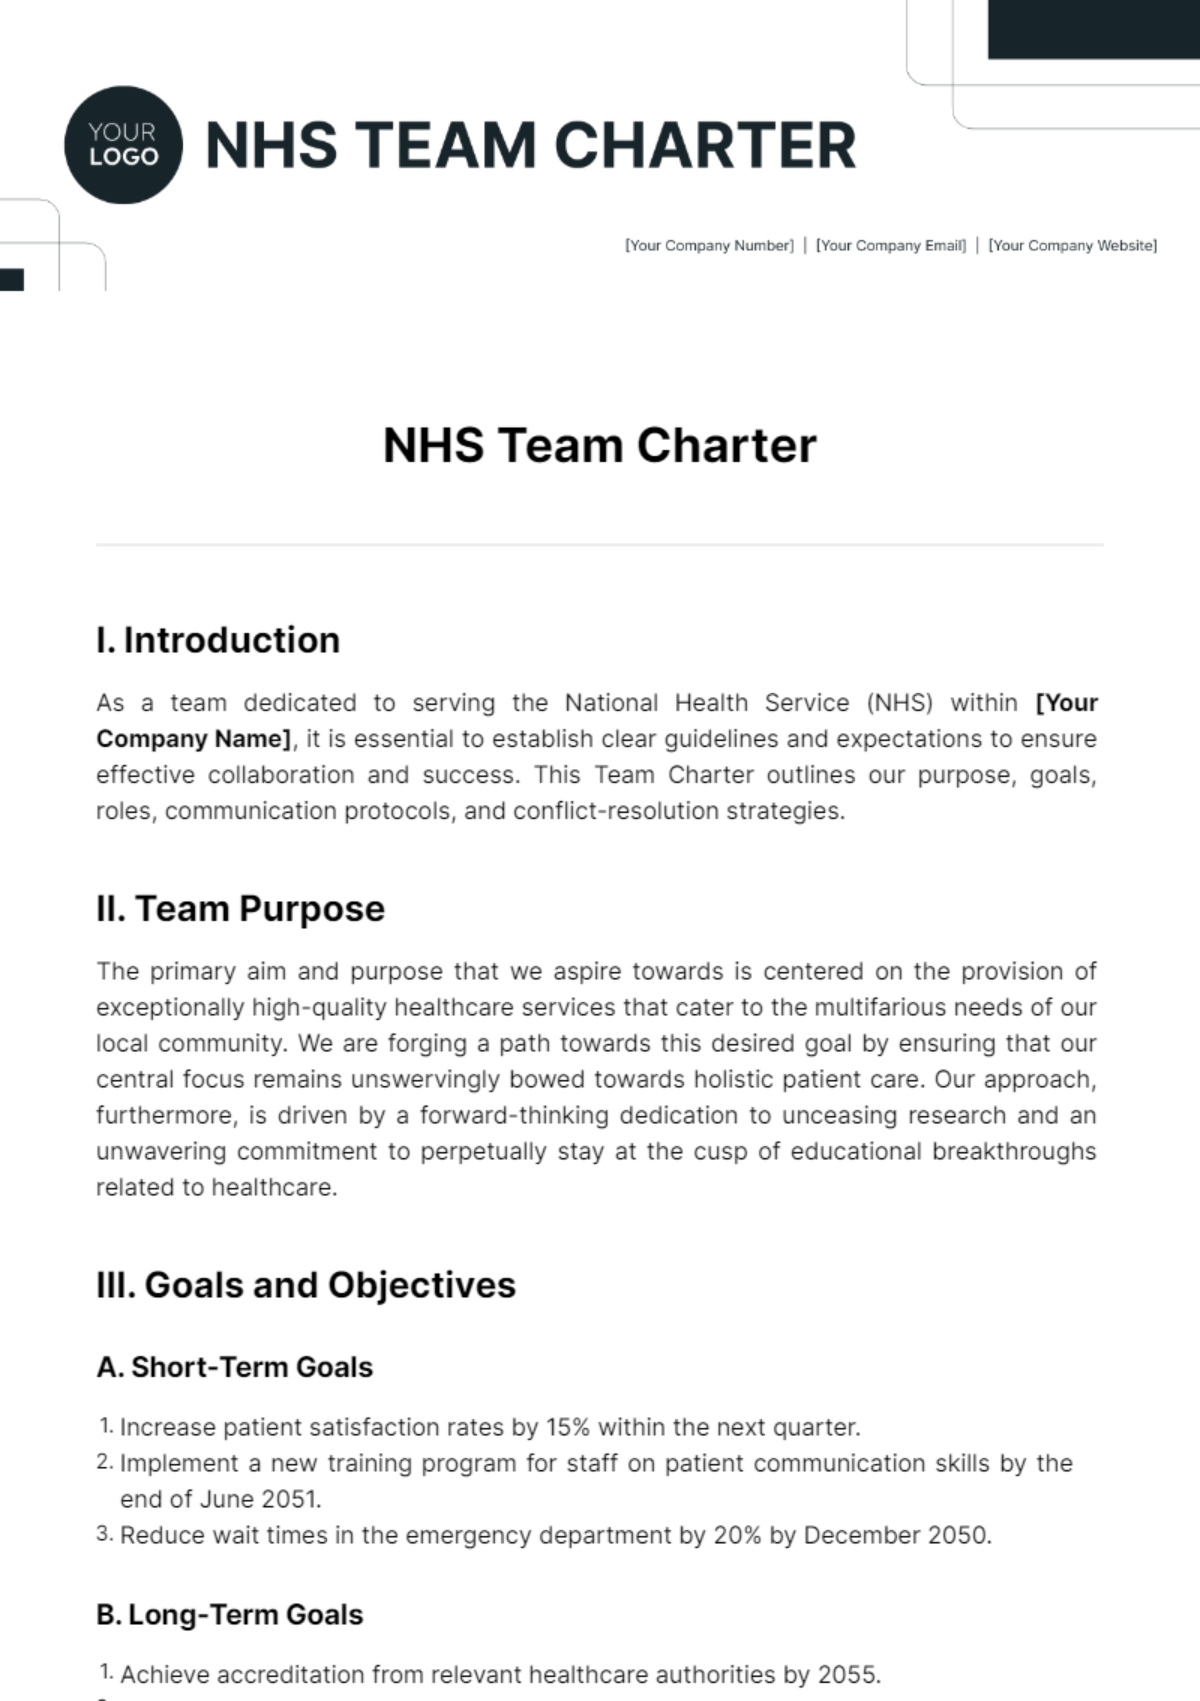 Free Nhs Team Charter Template